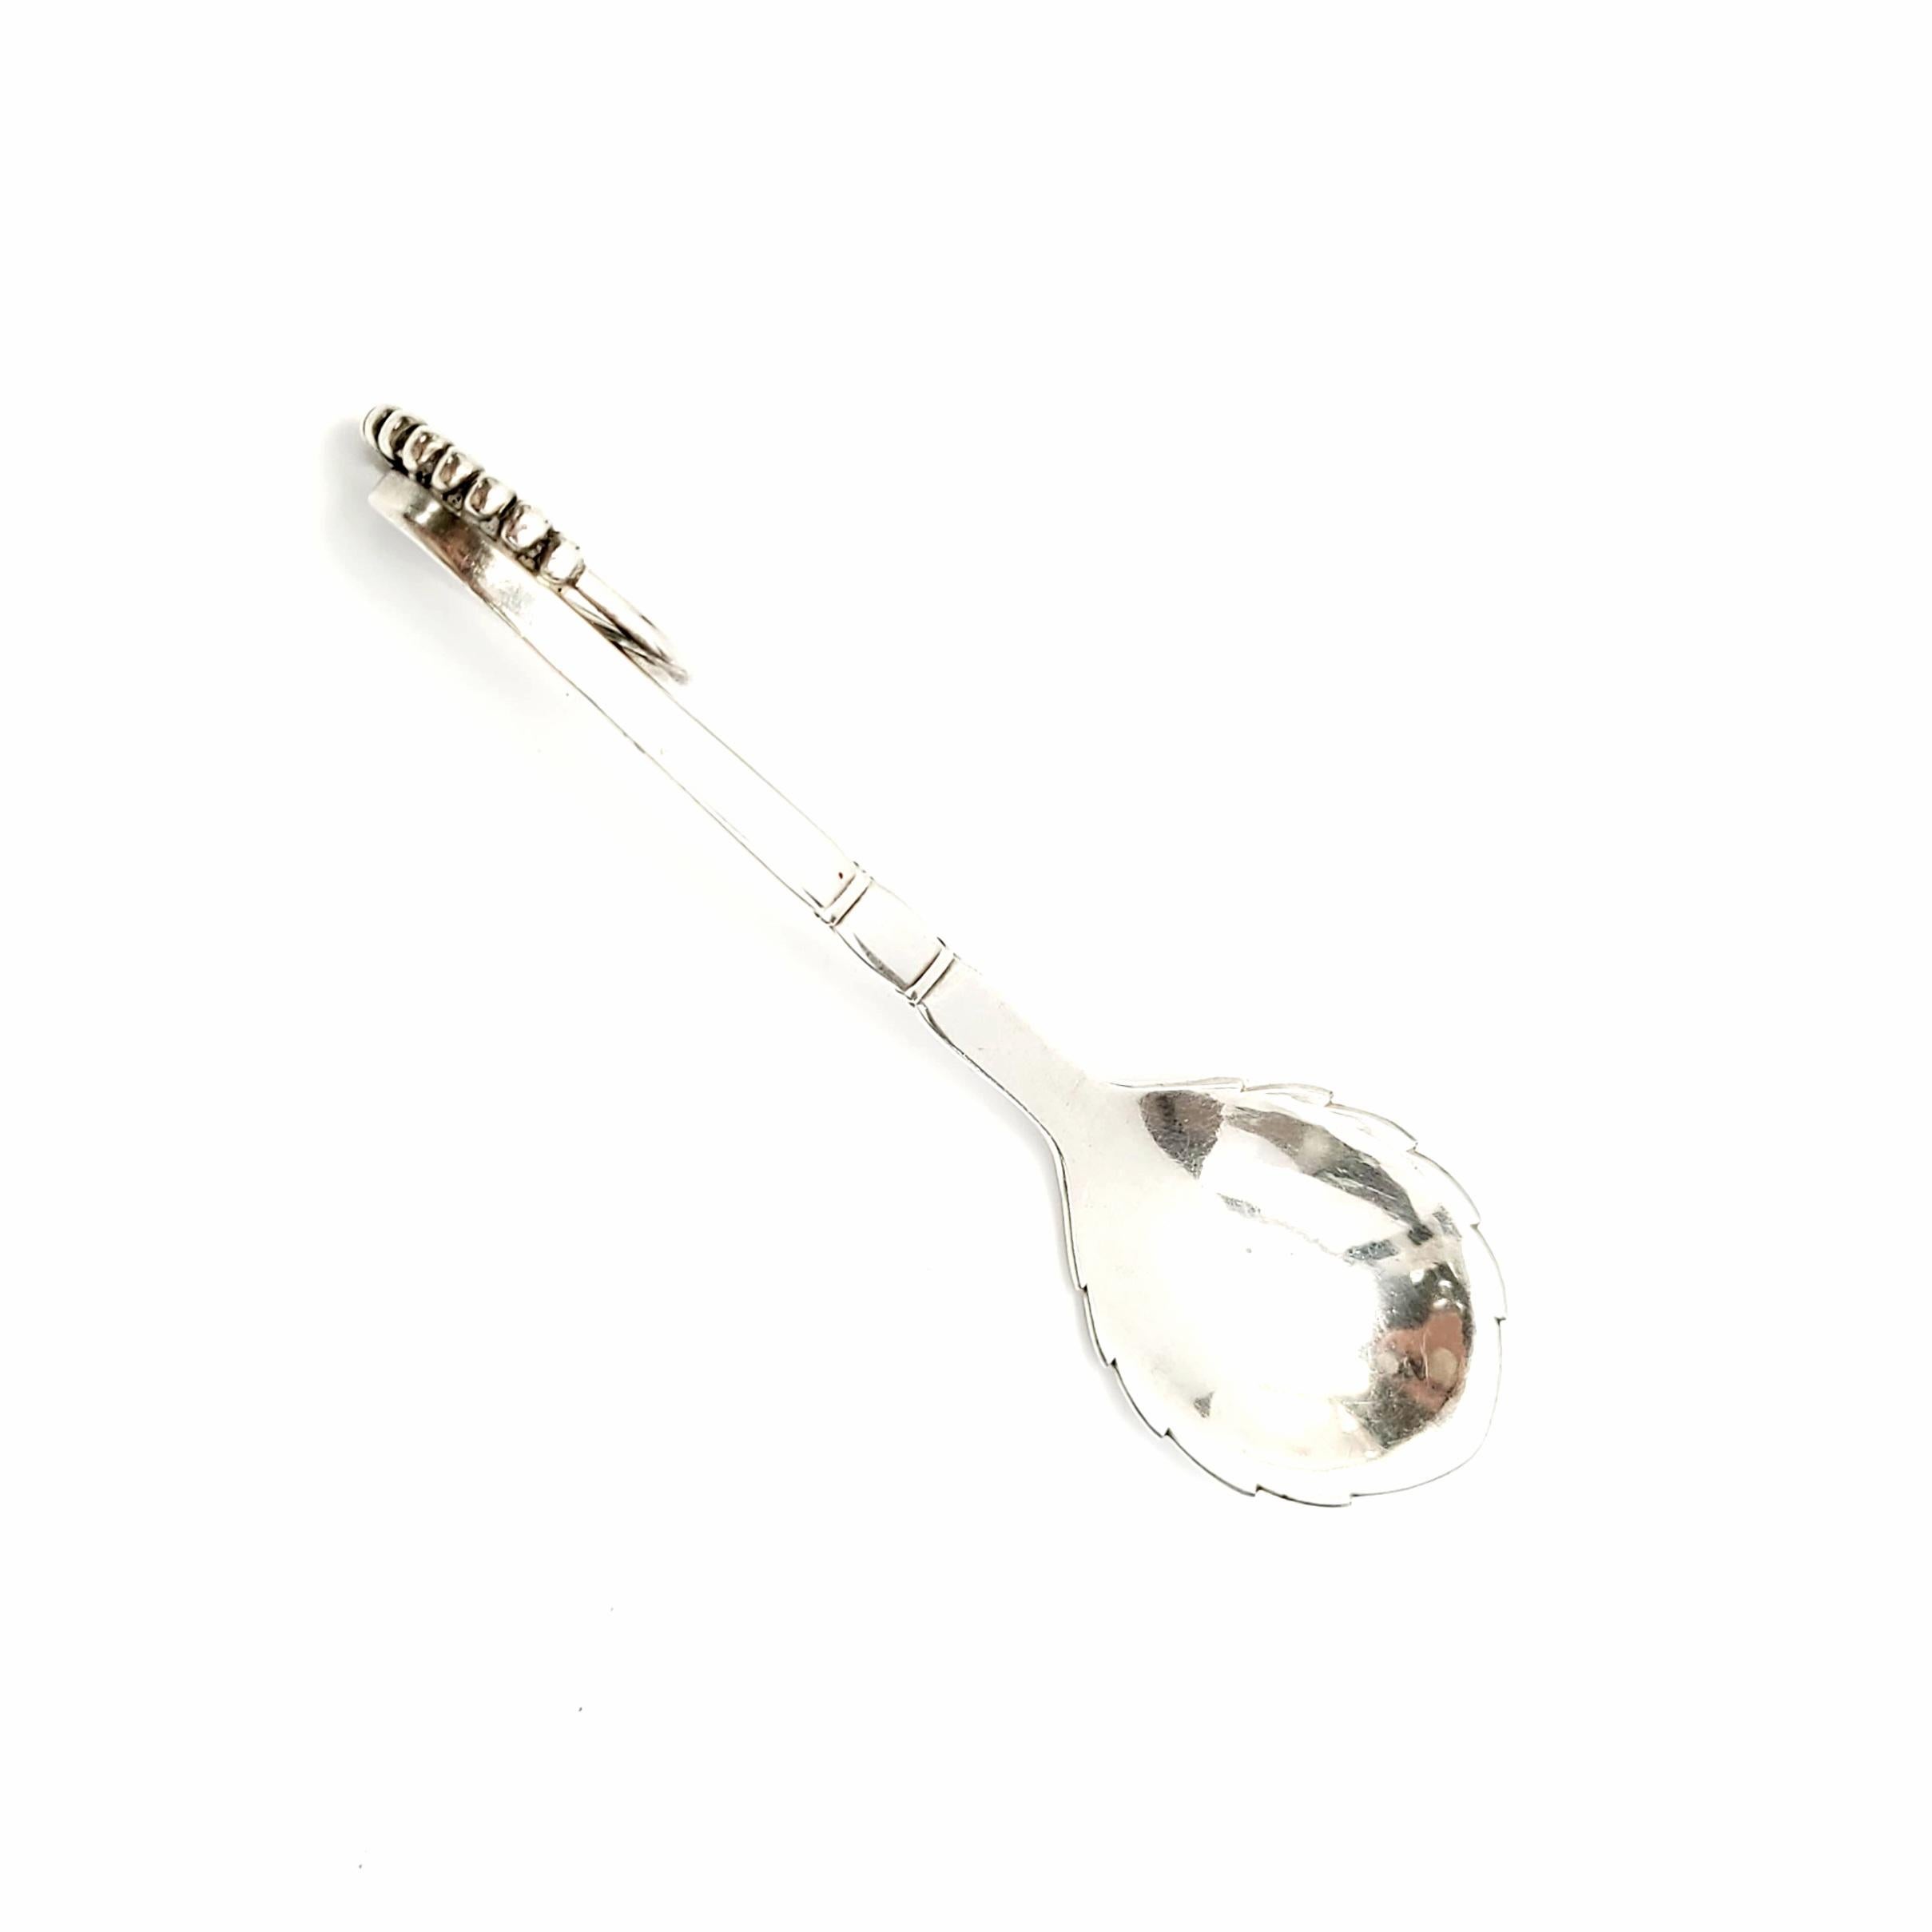 Vintage Georg Jensen Denmark sterling silver sugar spoon in the Ornamental #41 pattern.

Dated 1910-1925, this beautiful ladle features a lightly hammered bowl, with a beautifully ornate curved handle featuring a swirl of seed-like small silver